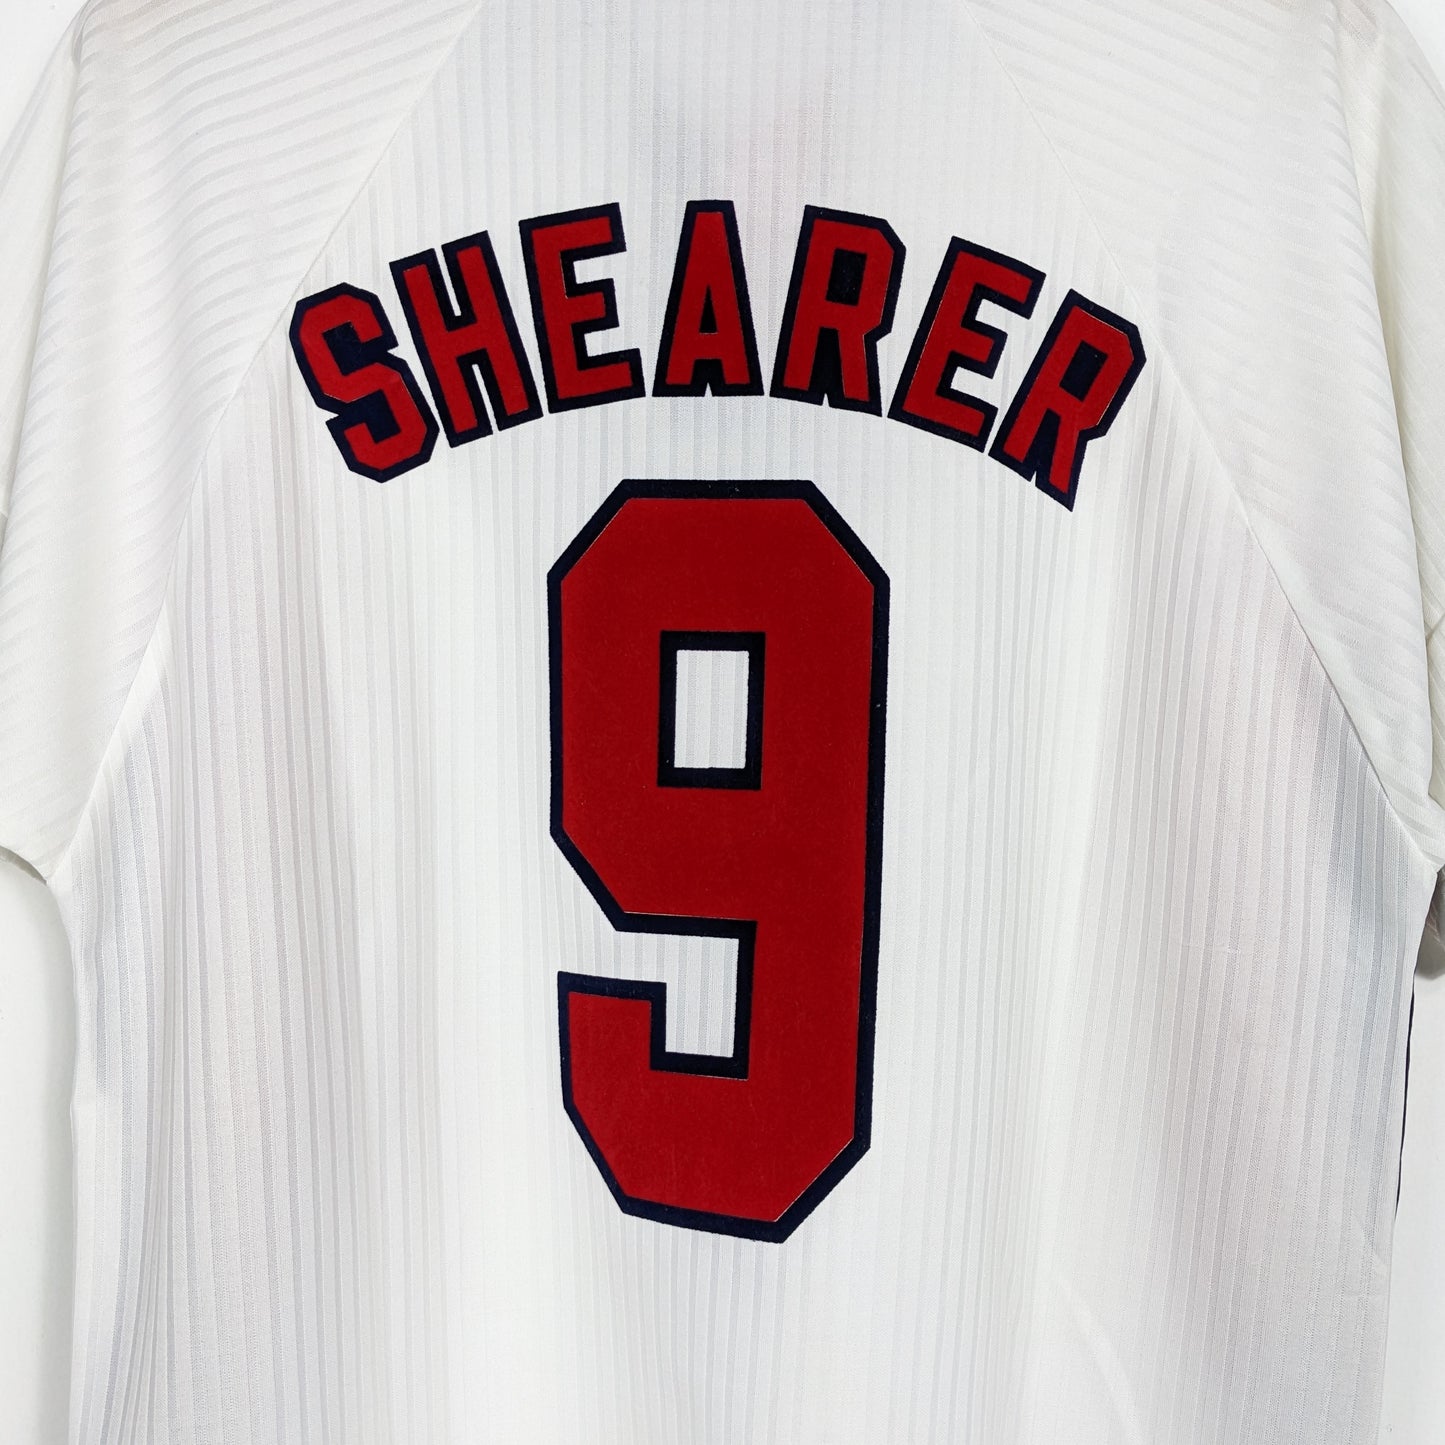 Authentic England 1998 Home - Shearer #9 Size M